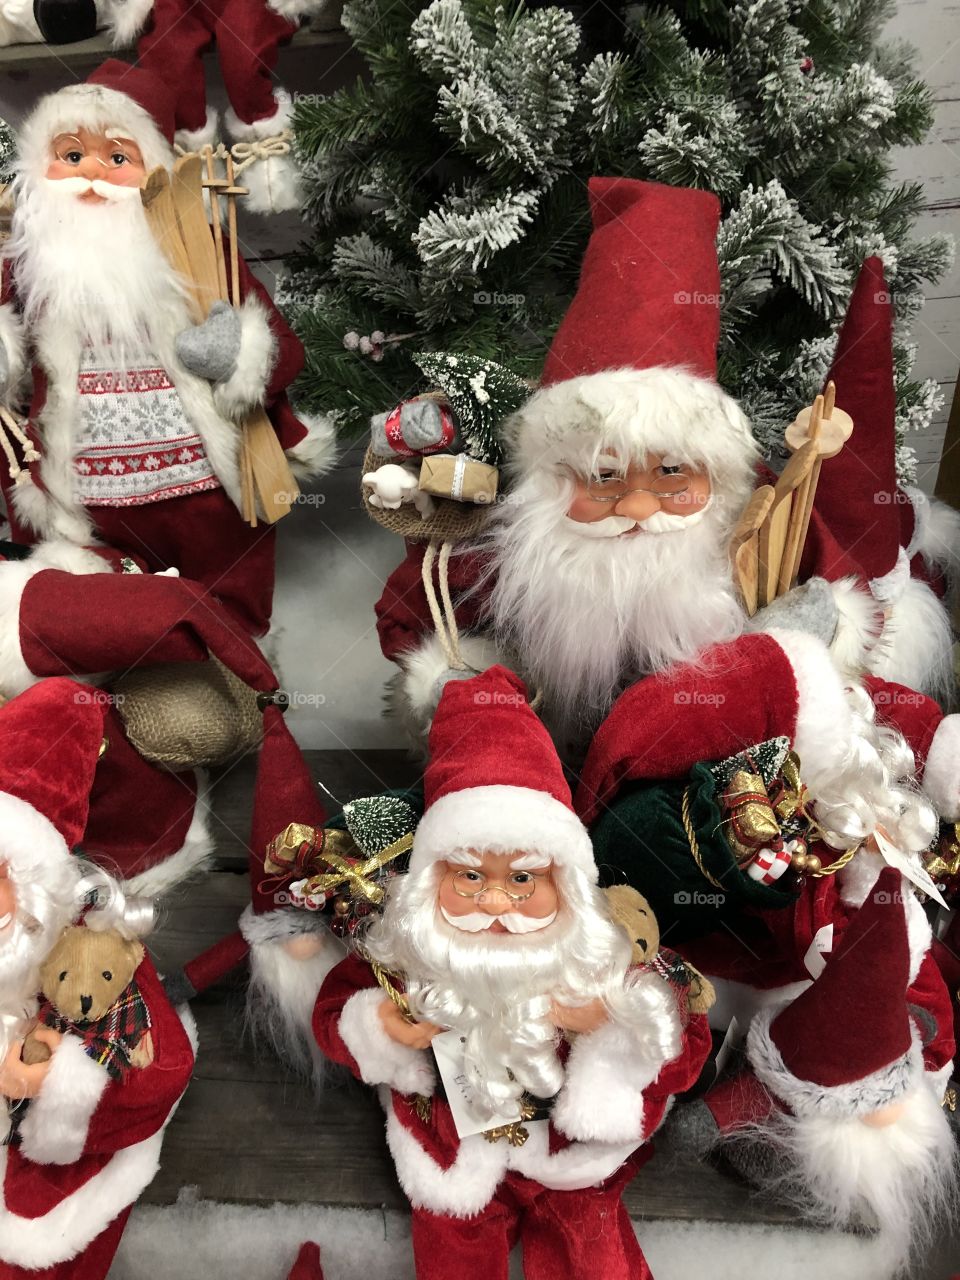 Here there are lots of father Christmas Ed reporting for duty, once they get their orders from big daddy Christmas, they can do their work and spread happiness.